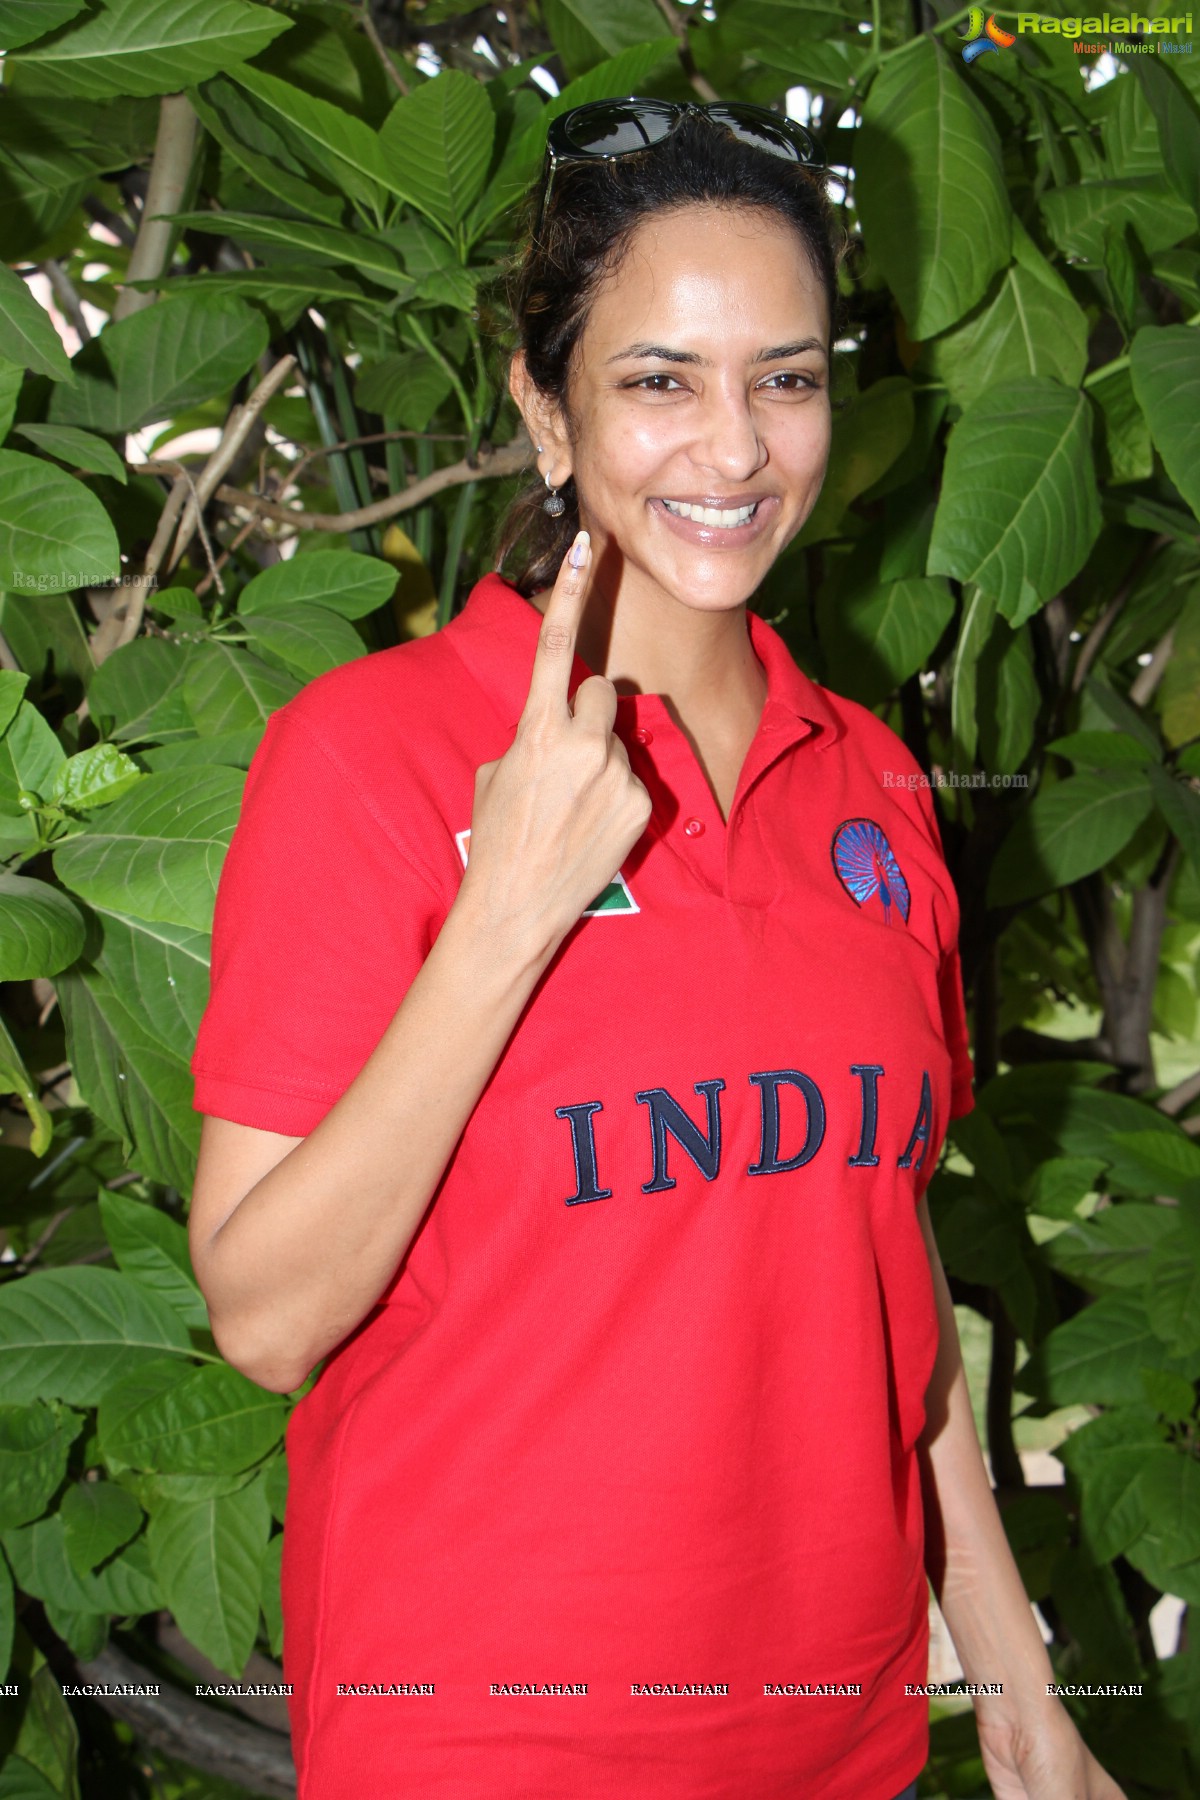 Tollywood Celebs cast their vote at FNCC, Hyderabad